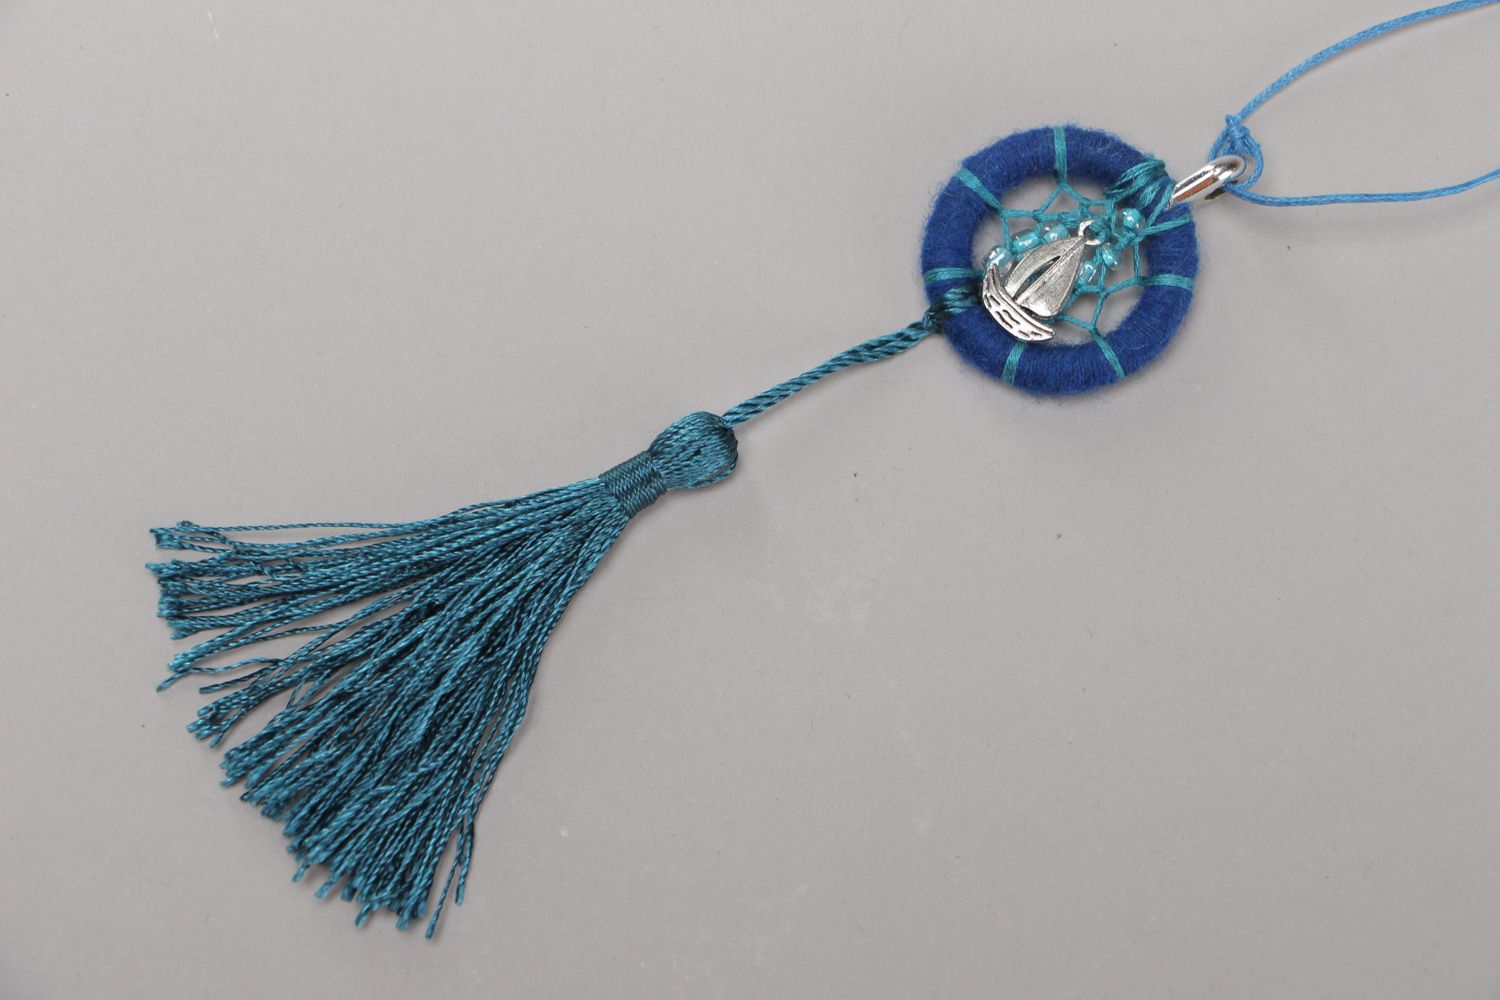 Handmade Native American dreamcatcher pendant necklace in blue color with tassel photo 2